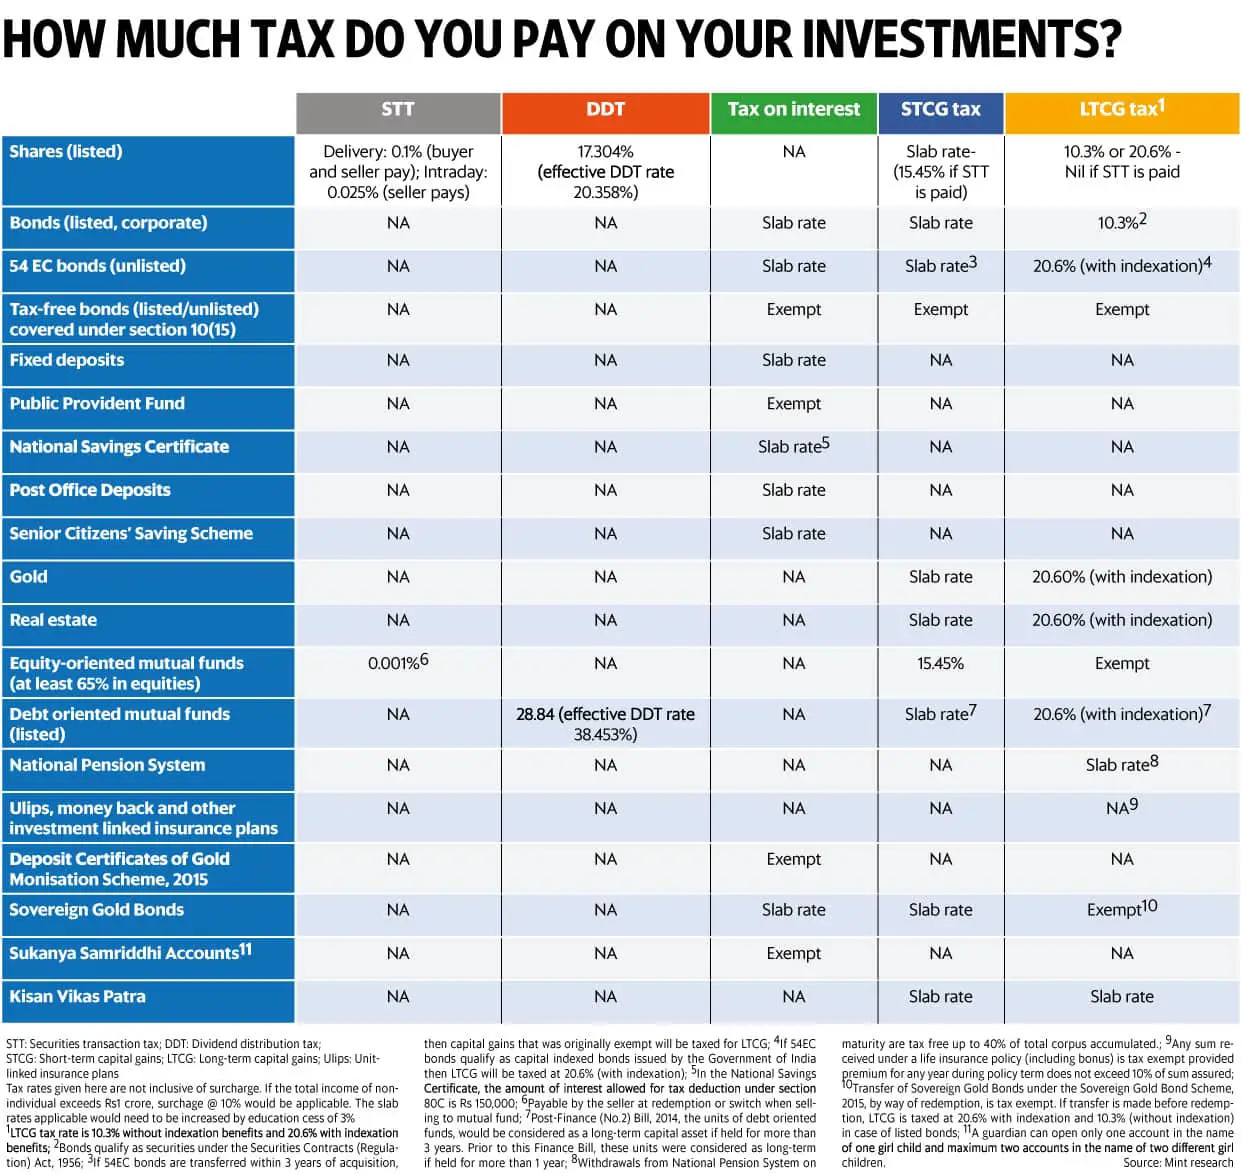 How Much Tax Should You Pay